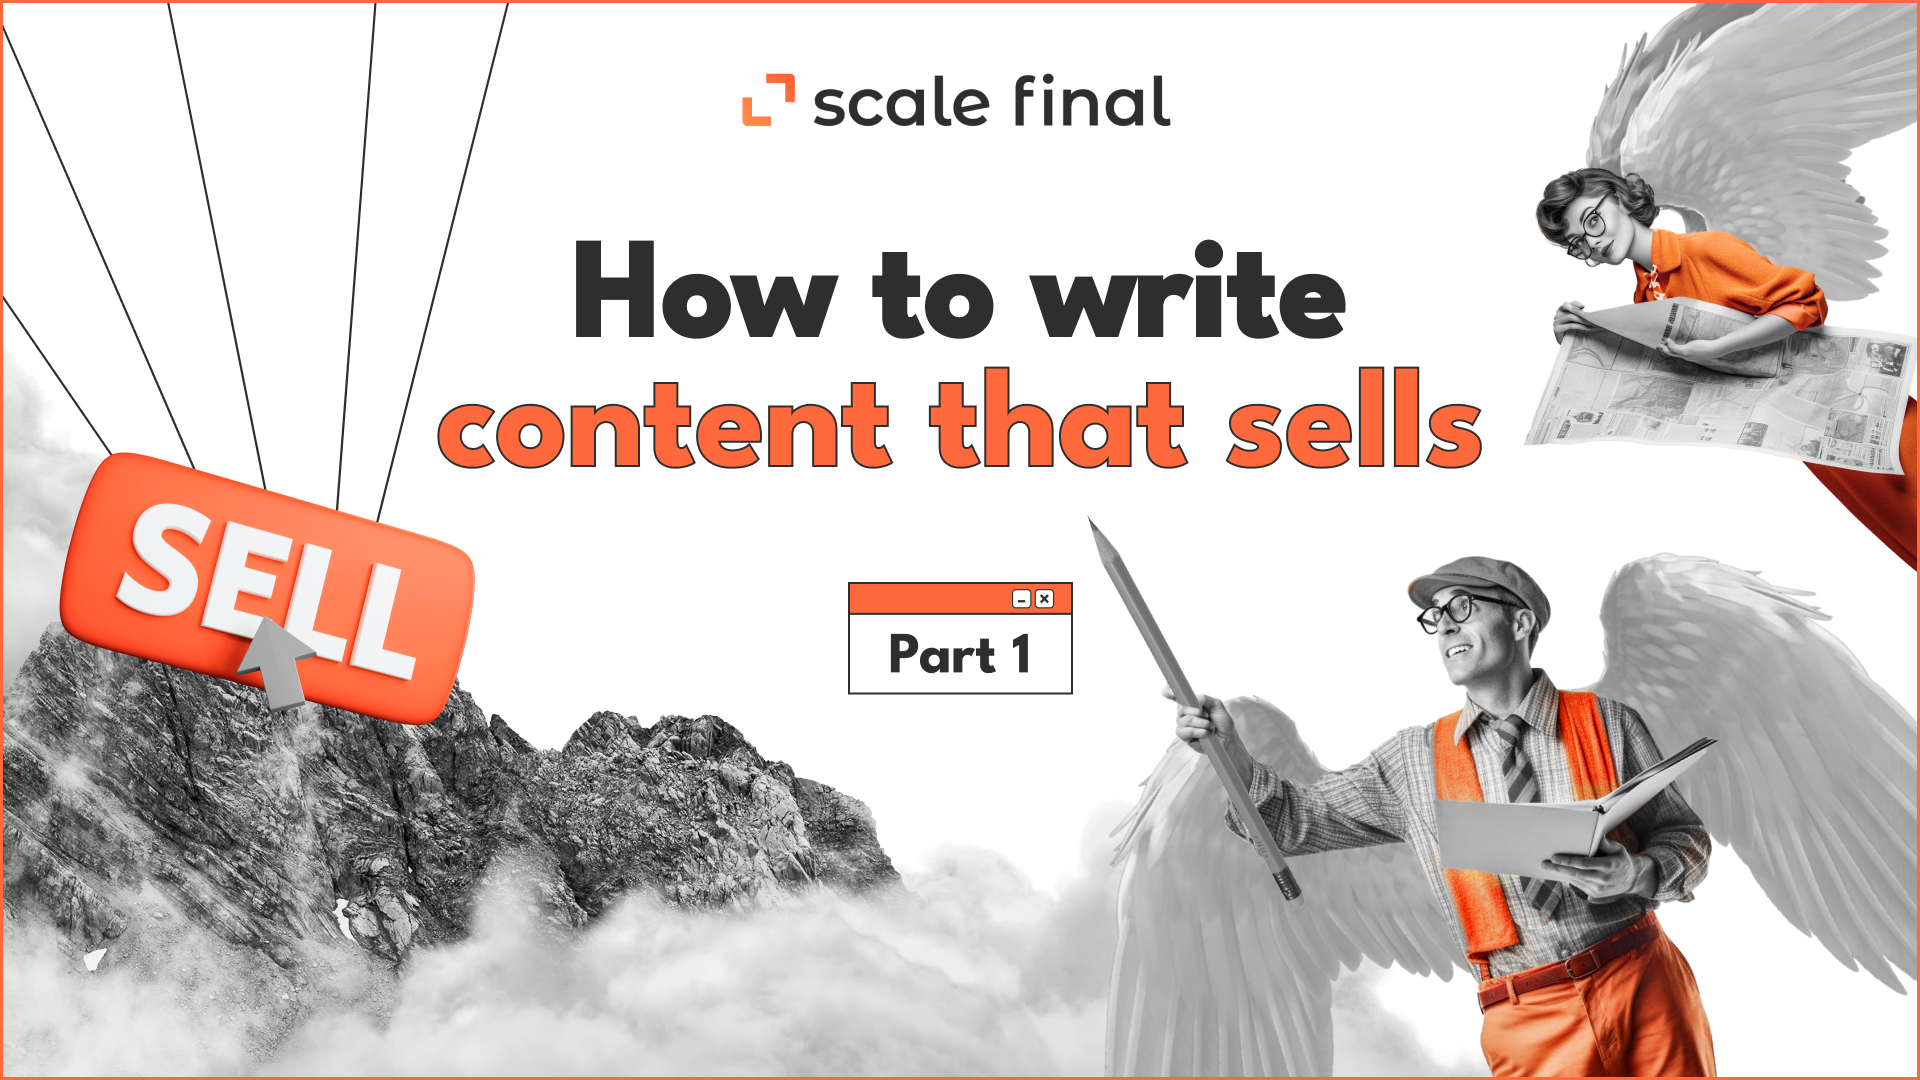 How to write content that sells. Part 1